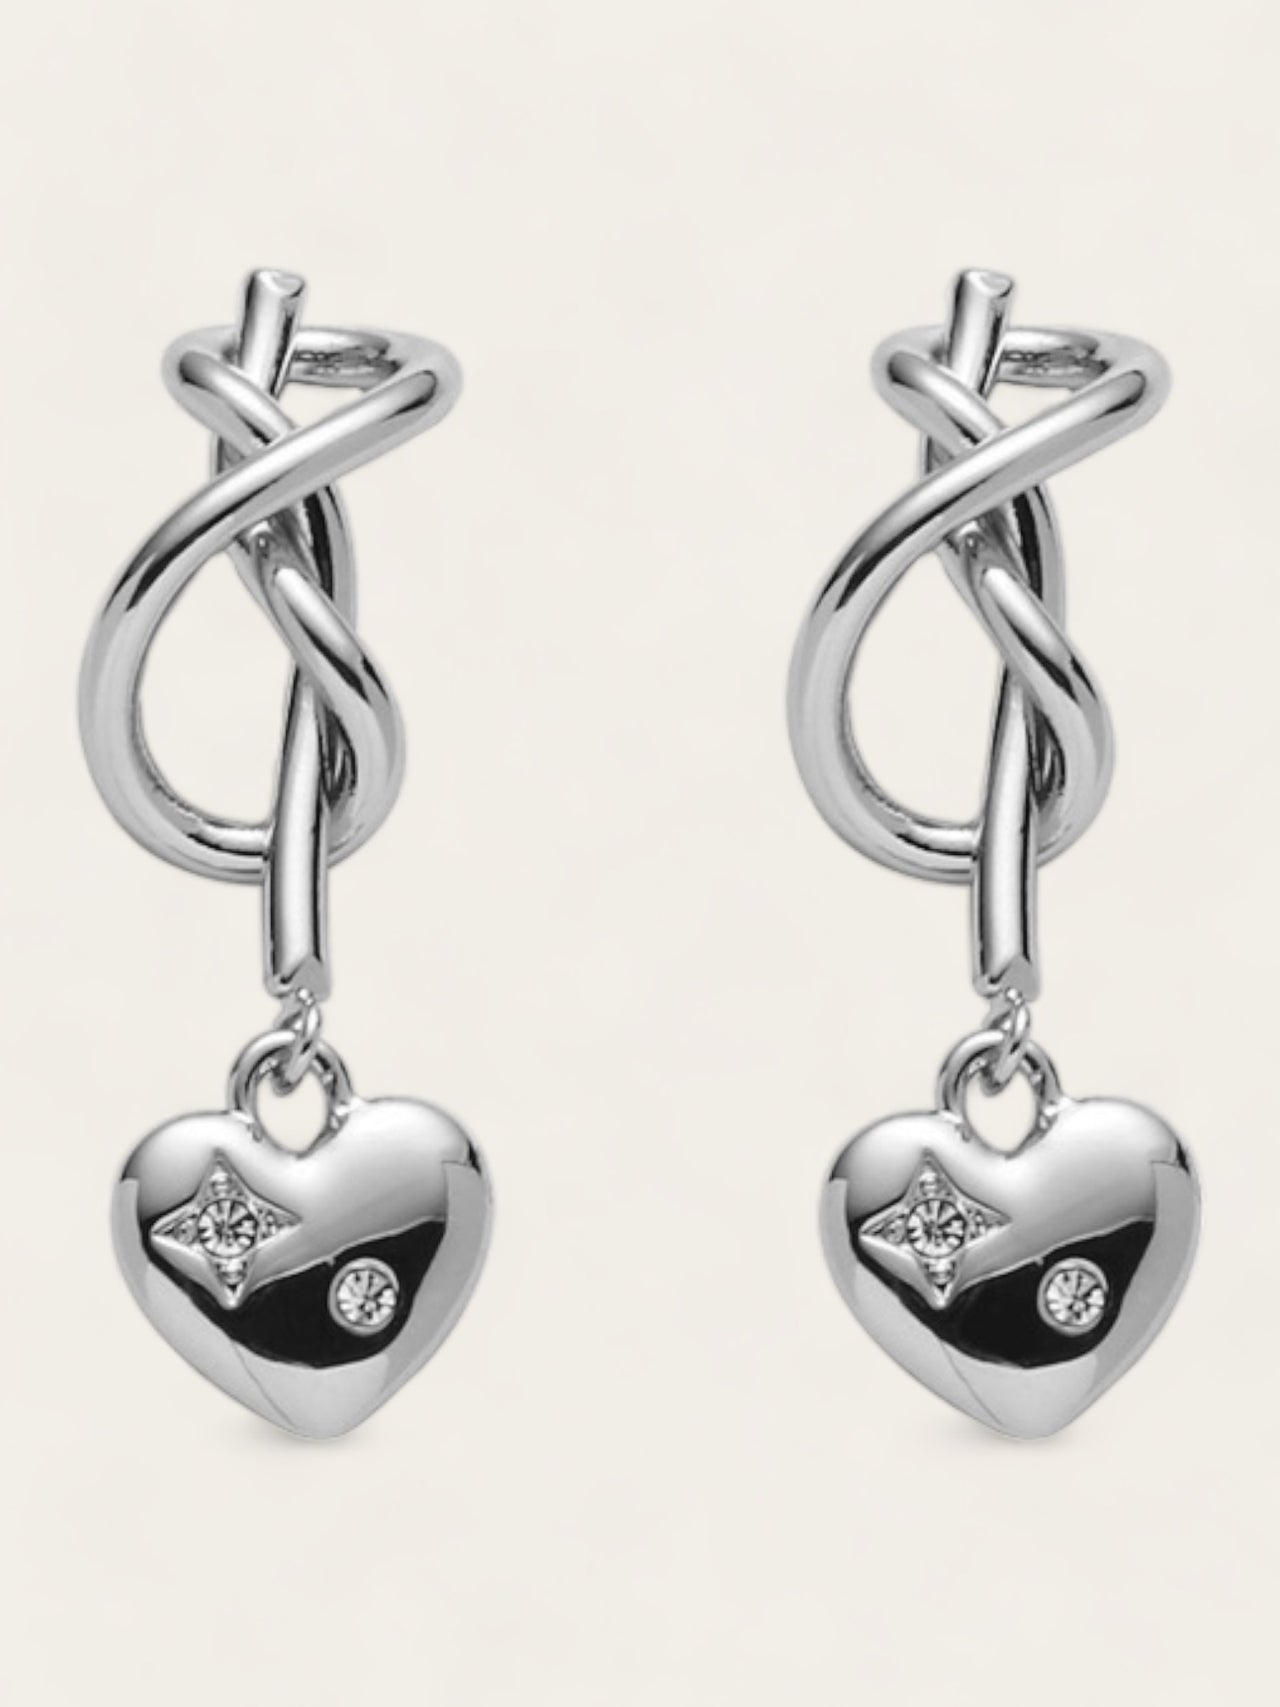 Knotted Earrings - Silver